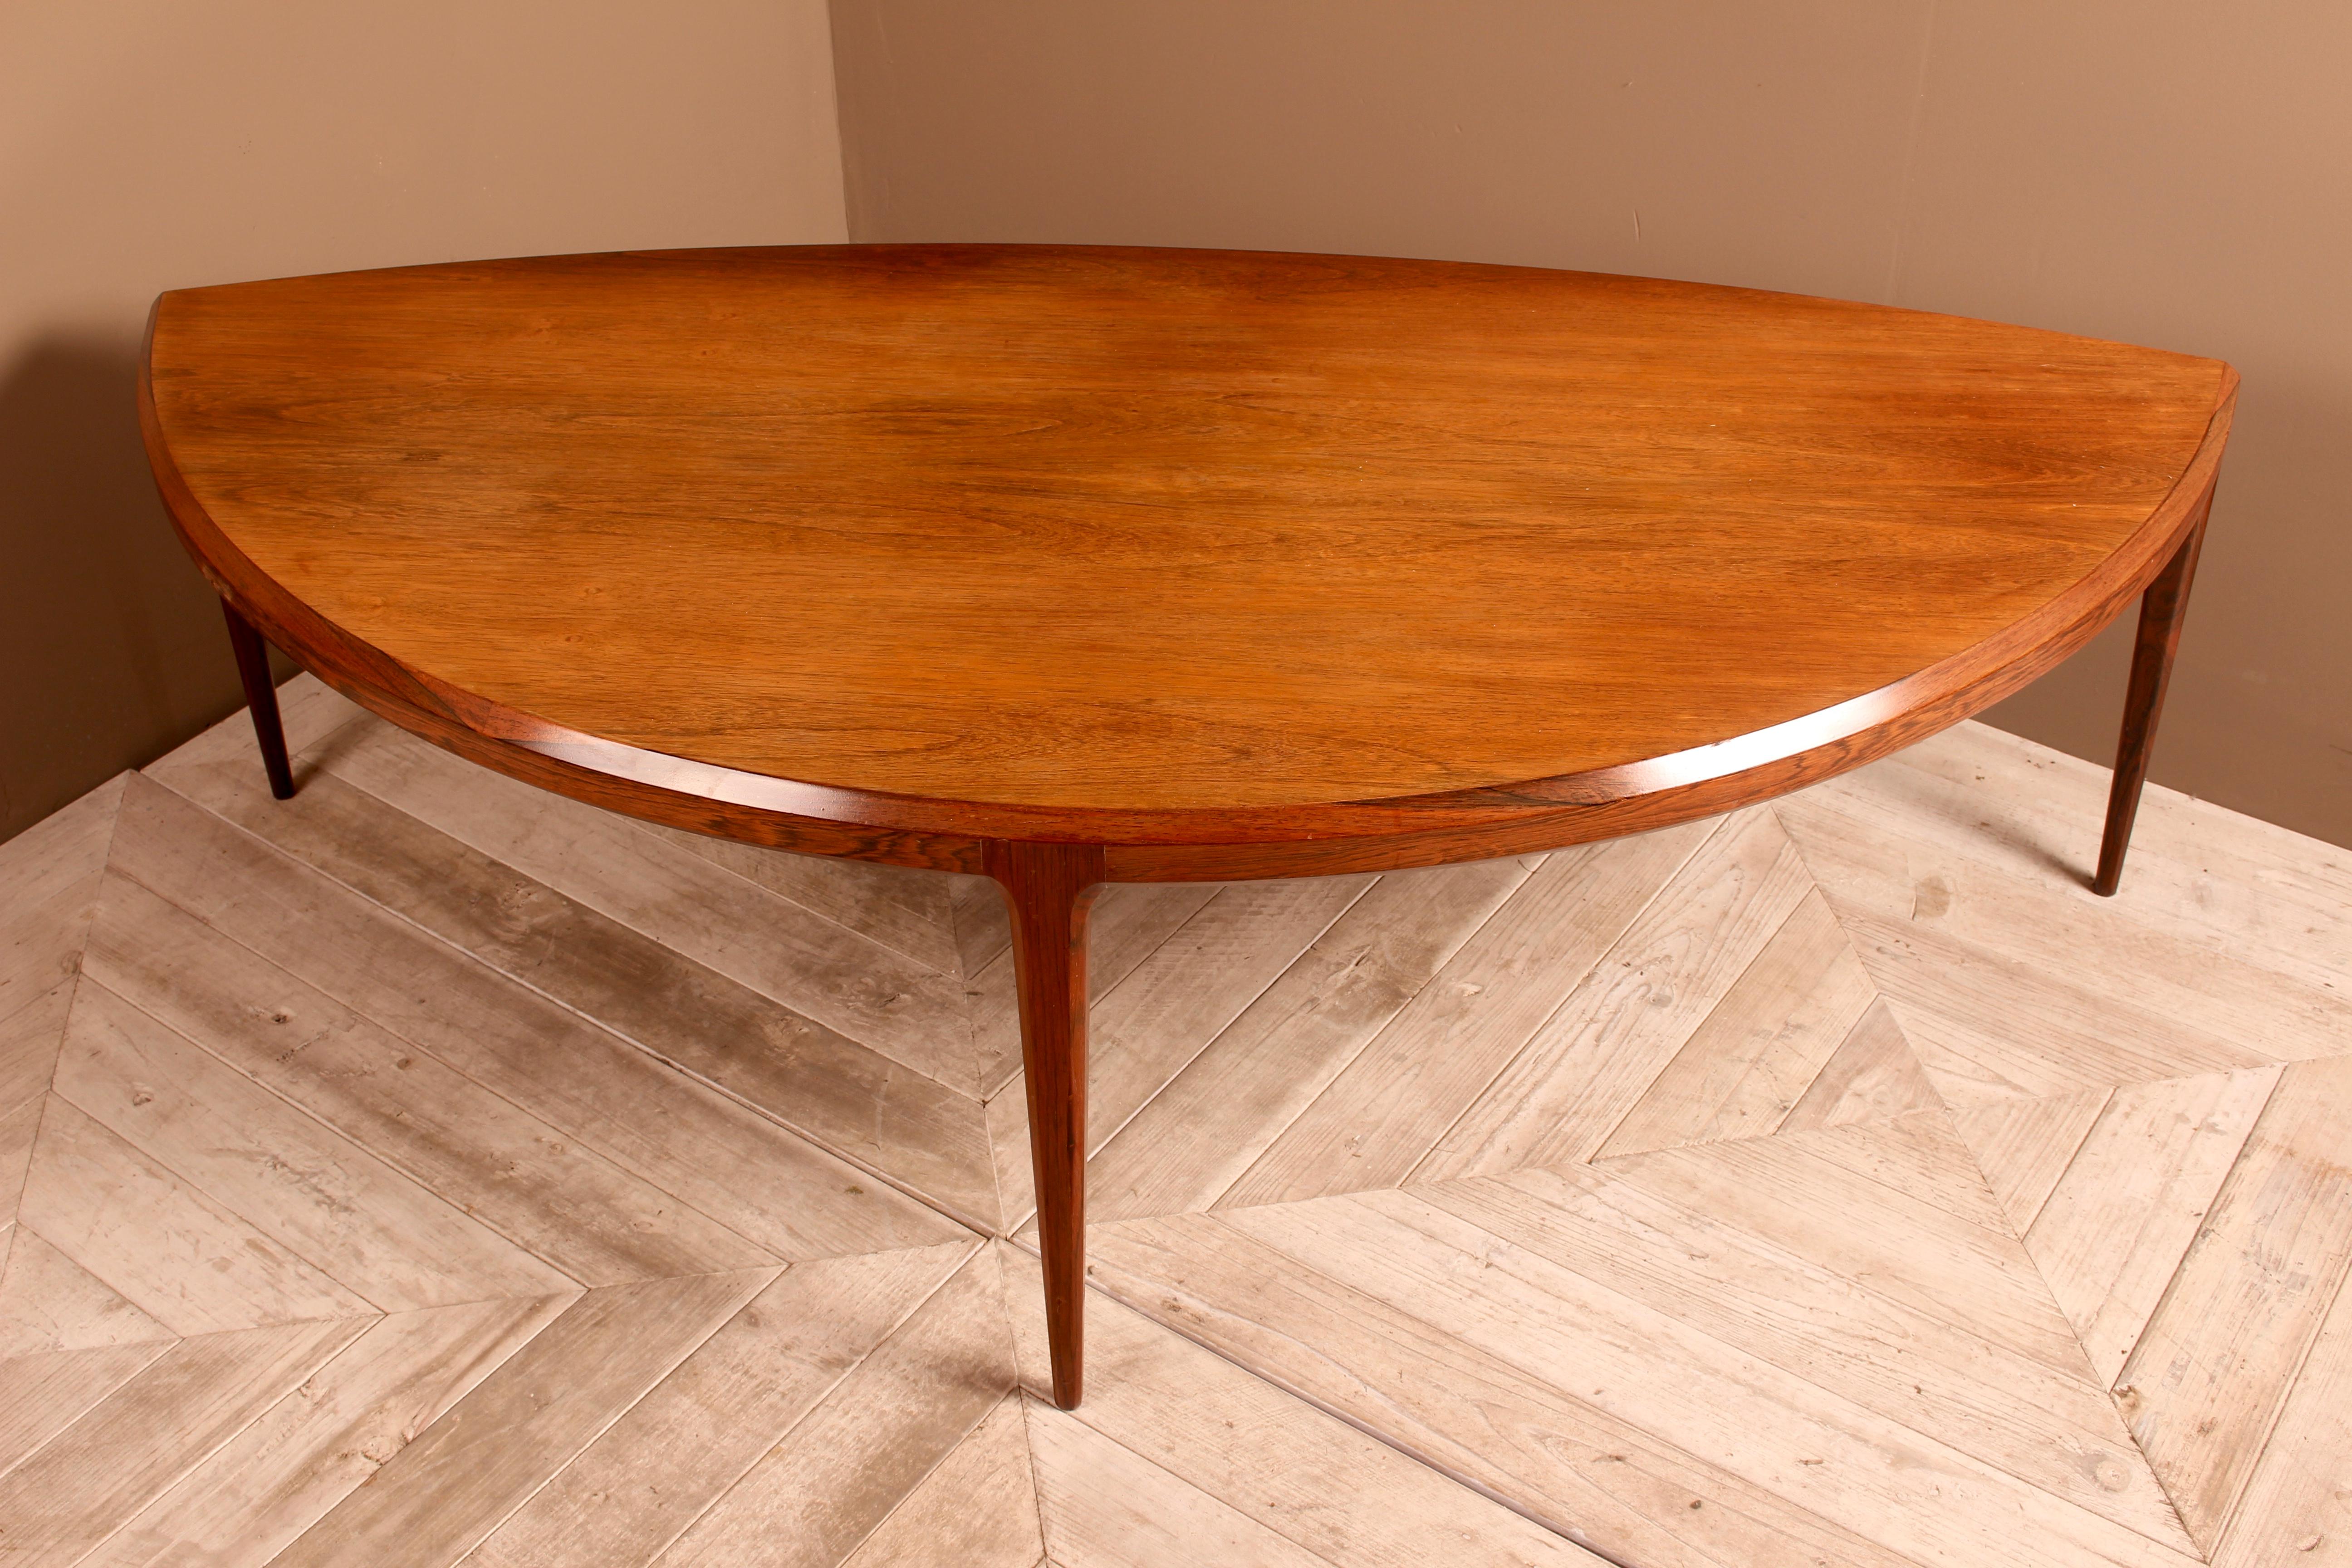 An attractive midcentury coffee table of demilune design made by the Danish firm CFC Silkeborg and designed by Johannes Anderson in the 1960s. Formed in the shape of an eye and having attractive chamfered edges to the tabletop and legs. The whole